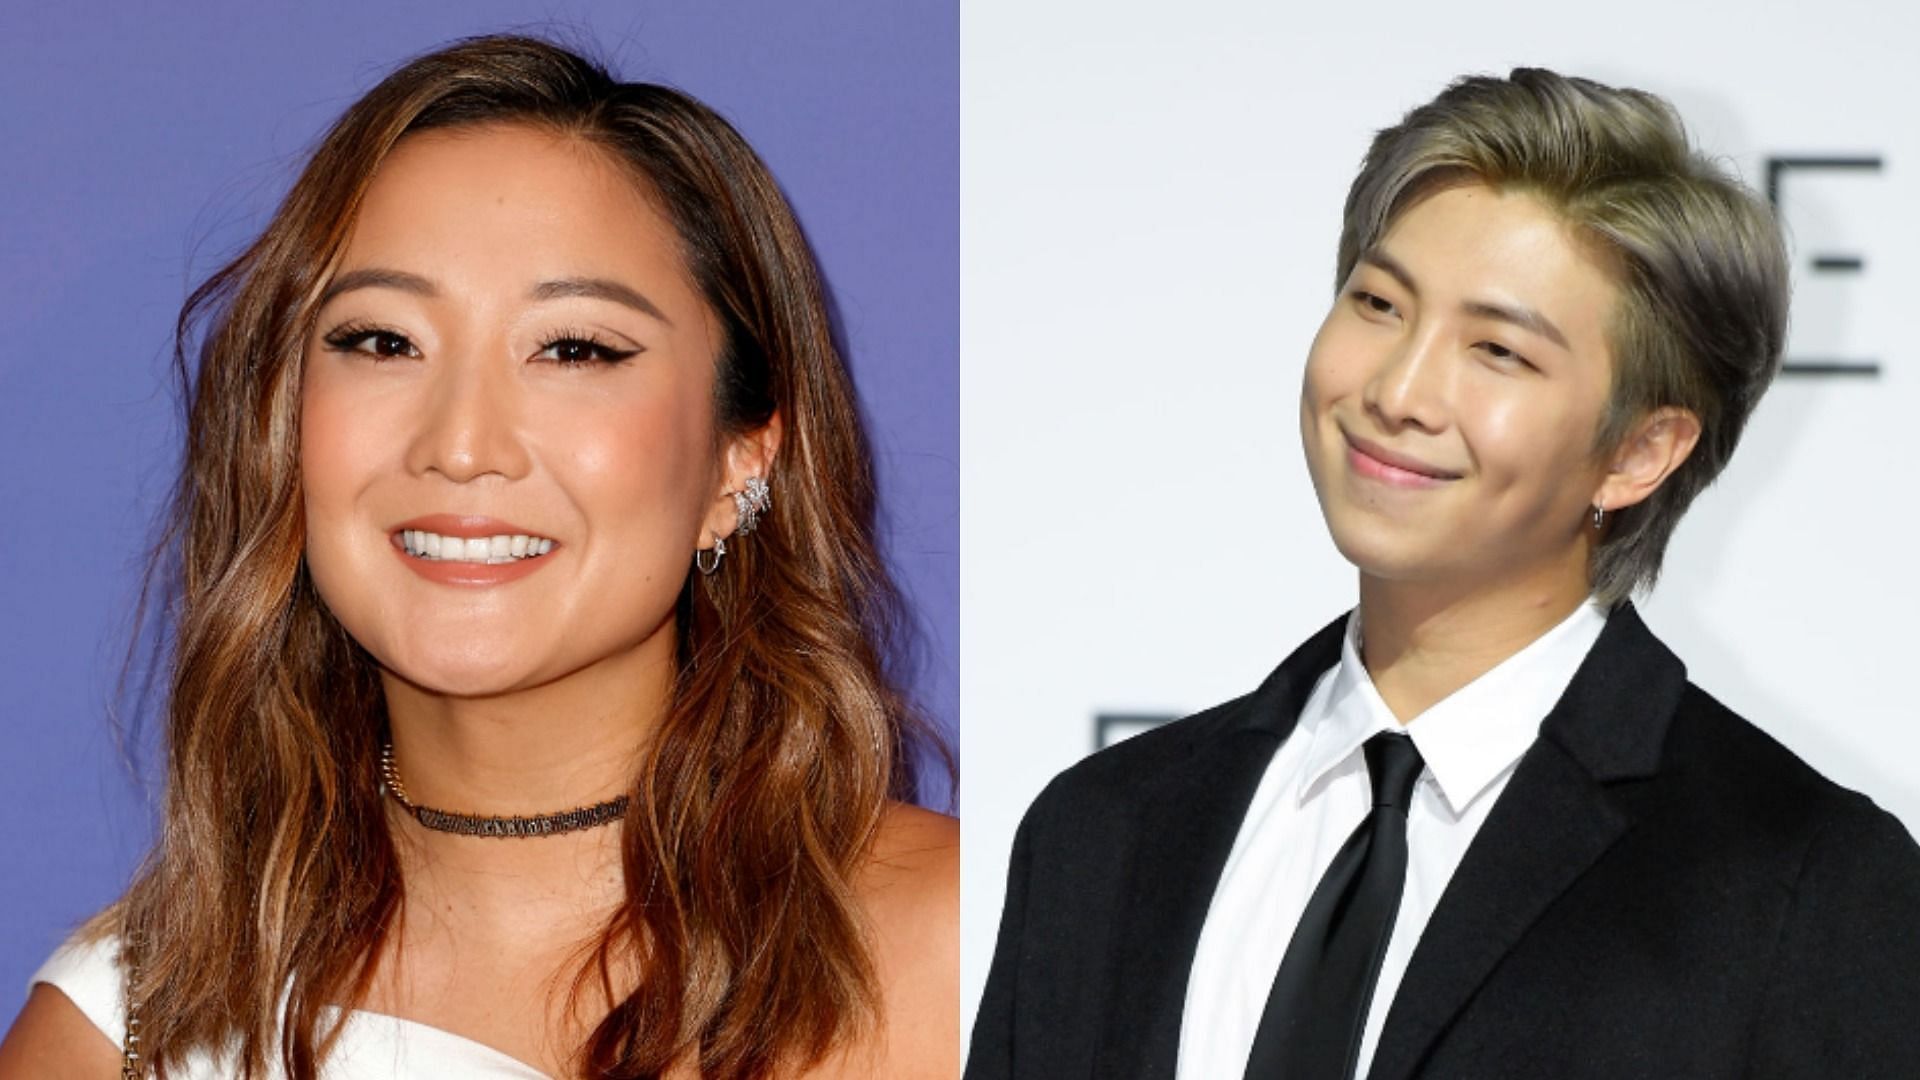 BTS&#039; RM praised Ashley Park&#039;s &#039;Dynamite&#039; cover on &#039;Emily in Paris&#039; (Image via Getty Images/Frazer Harrison and The Chosunilbo JNS)